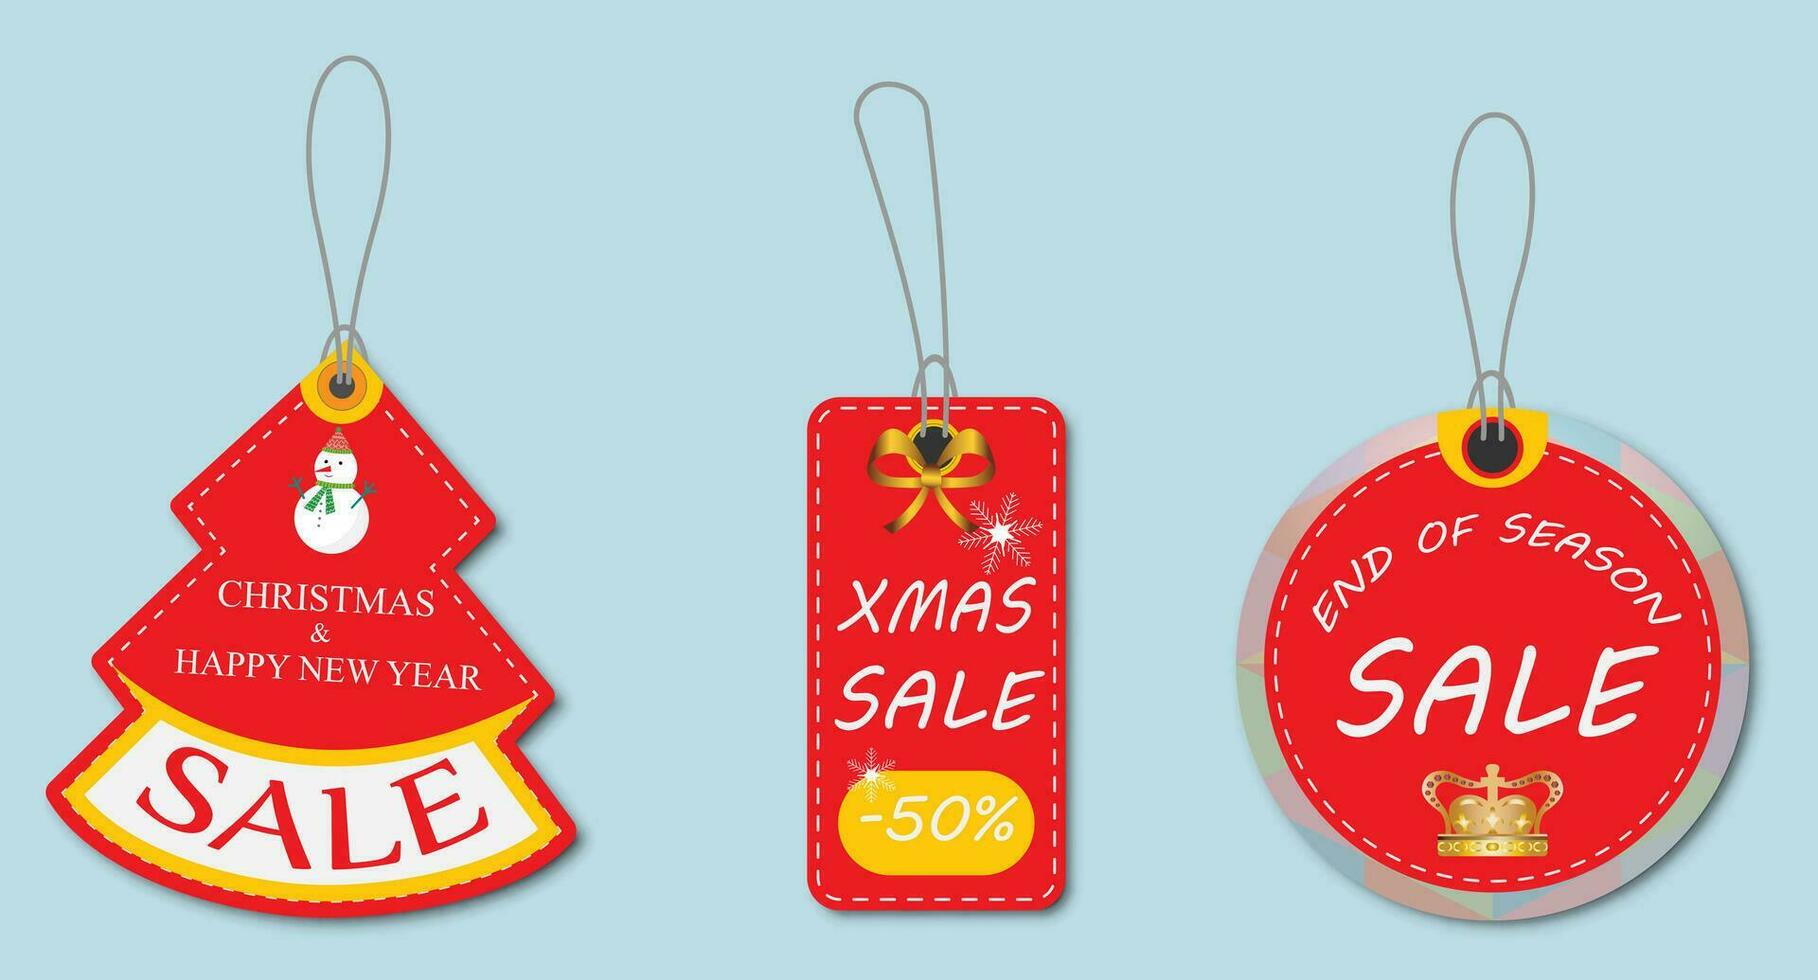 Set of Christmas Retail Sale Tags and Clearance Tags with different shapes and discount text for New Year holiday shopping promotion. Vector illustration.